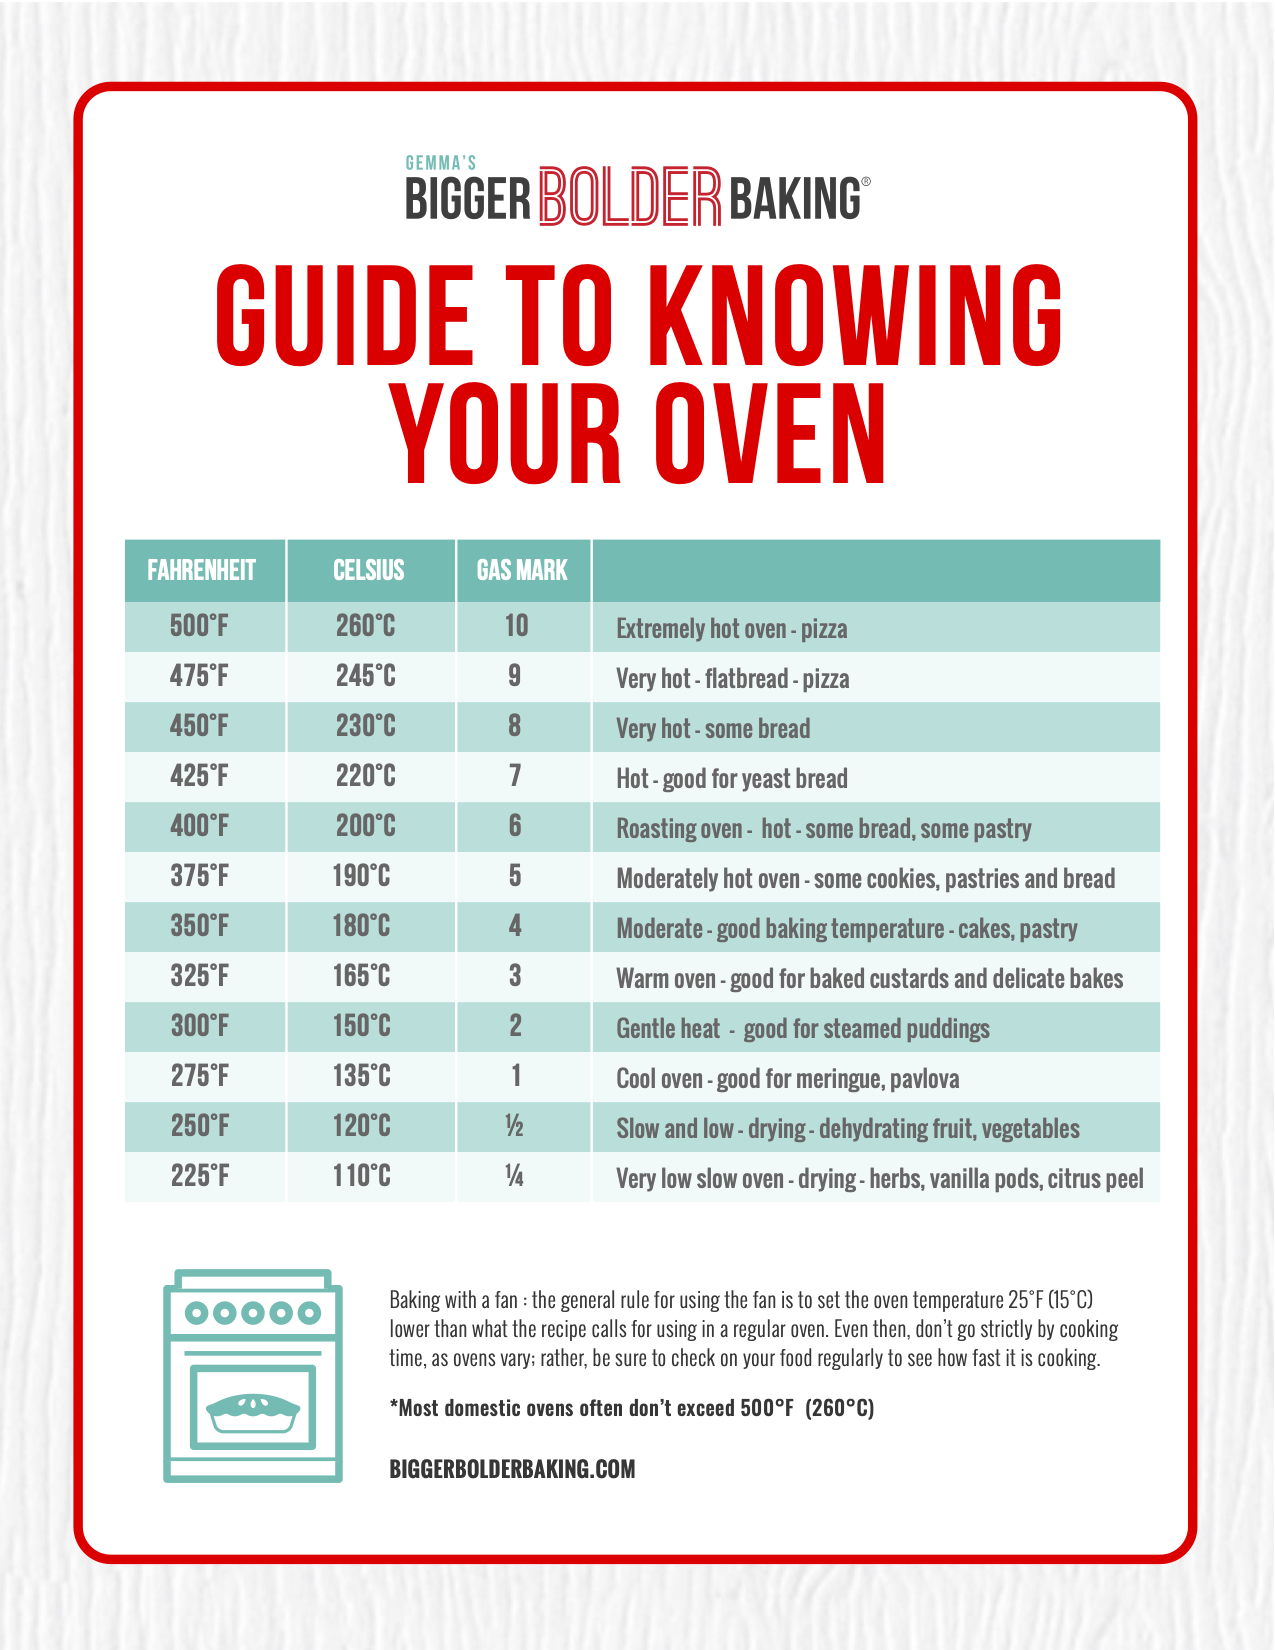 https://www.biggerbolderbaking.com/wp-content/uploads/2019/08/Guide-to-Knowing-Your-Oven.jpg